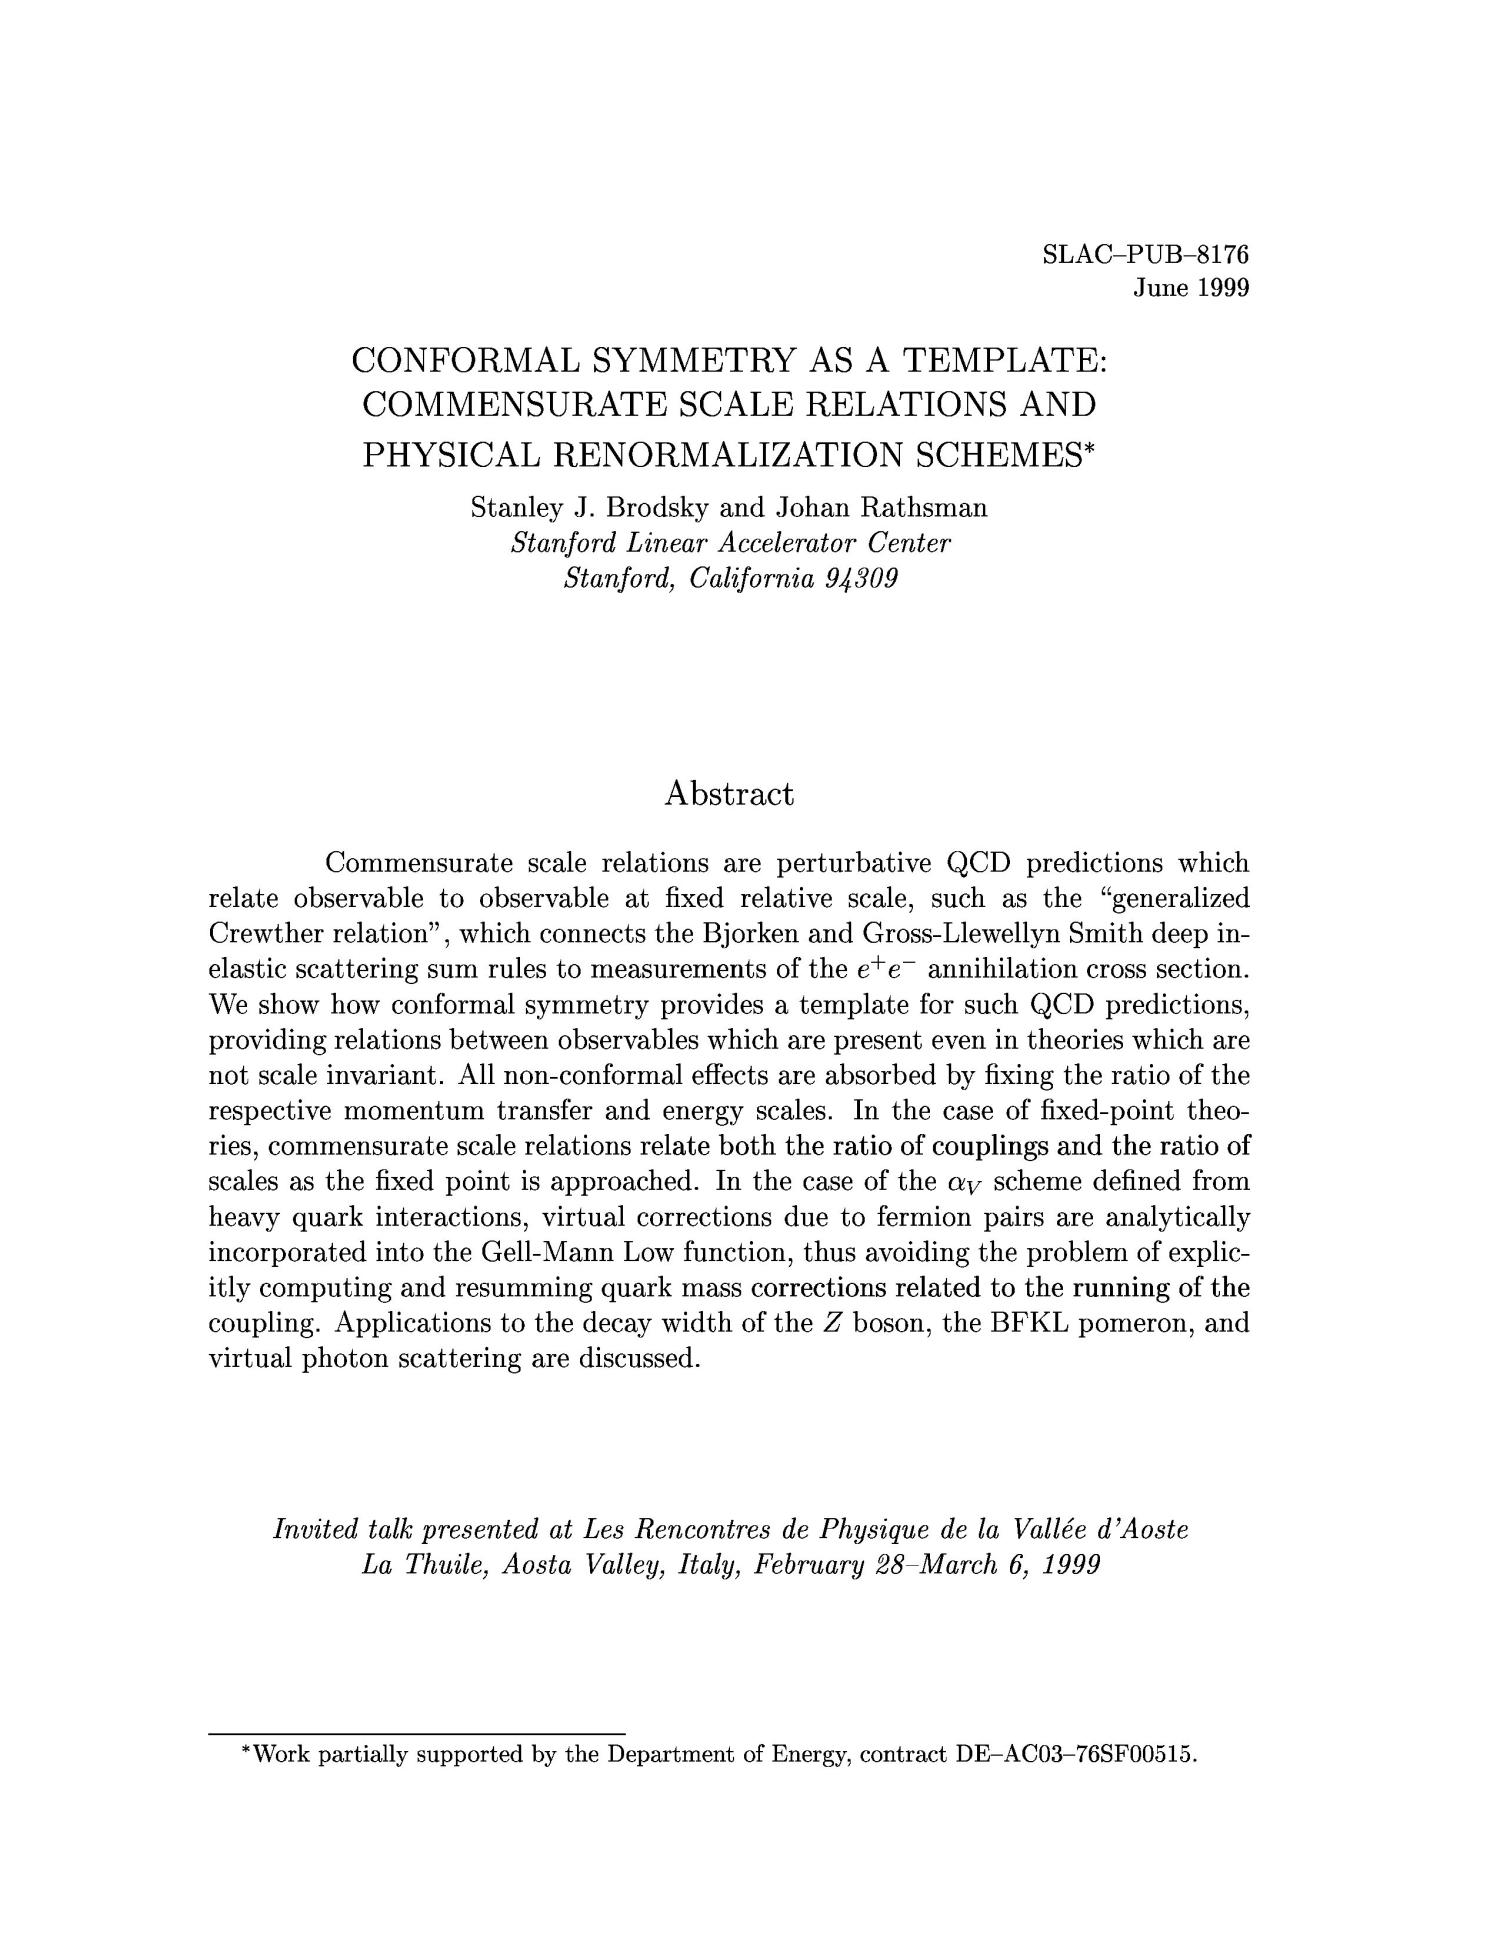 Conformal Symmetry as a Template:Commensurate Scale Relations and Physical Renormalization Schemes
                                                
                                                    [Sequence #]: 1 of 27
                                                